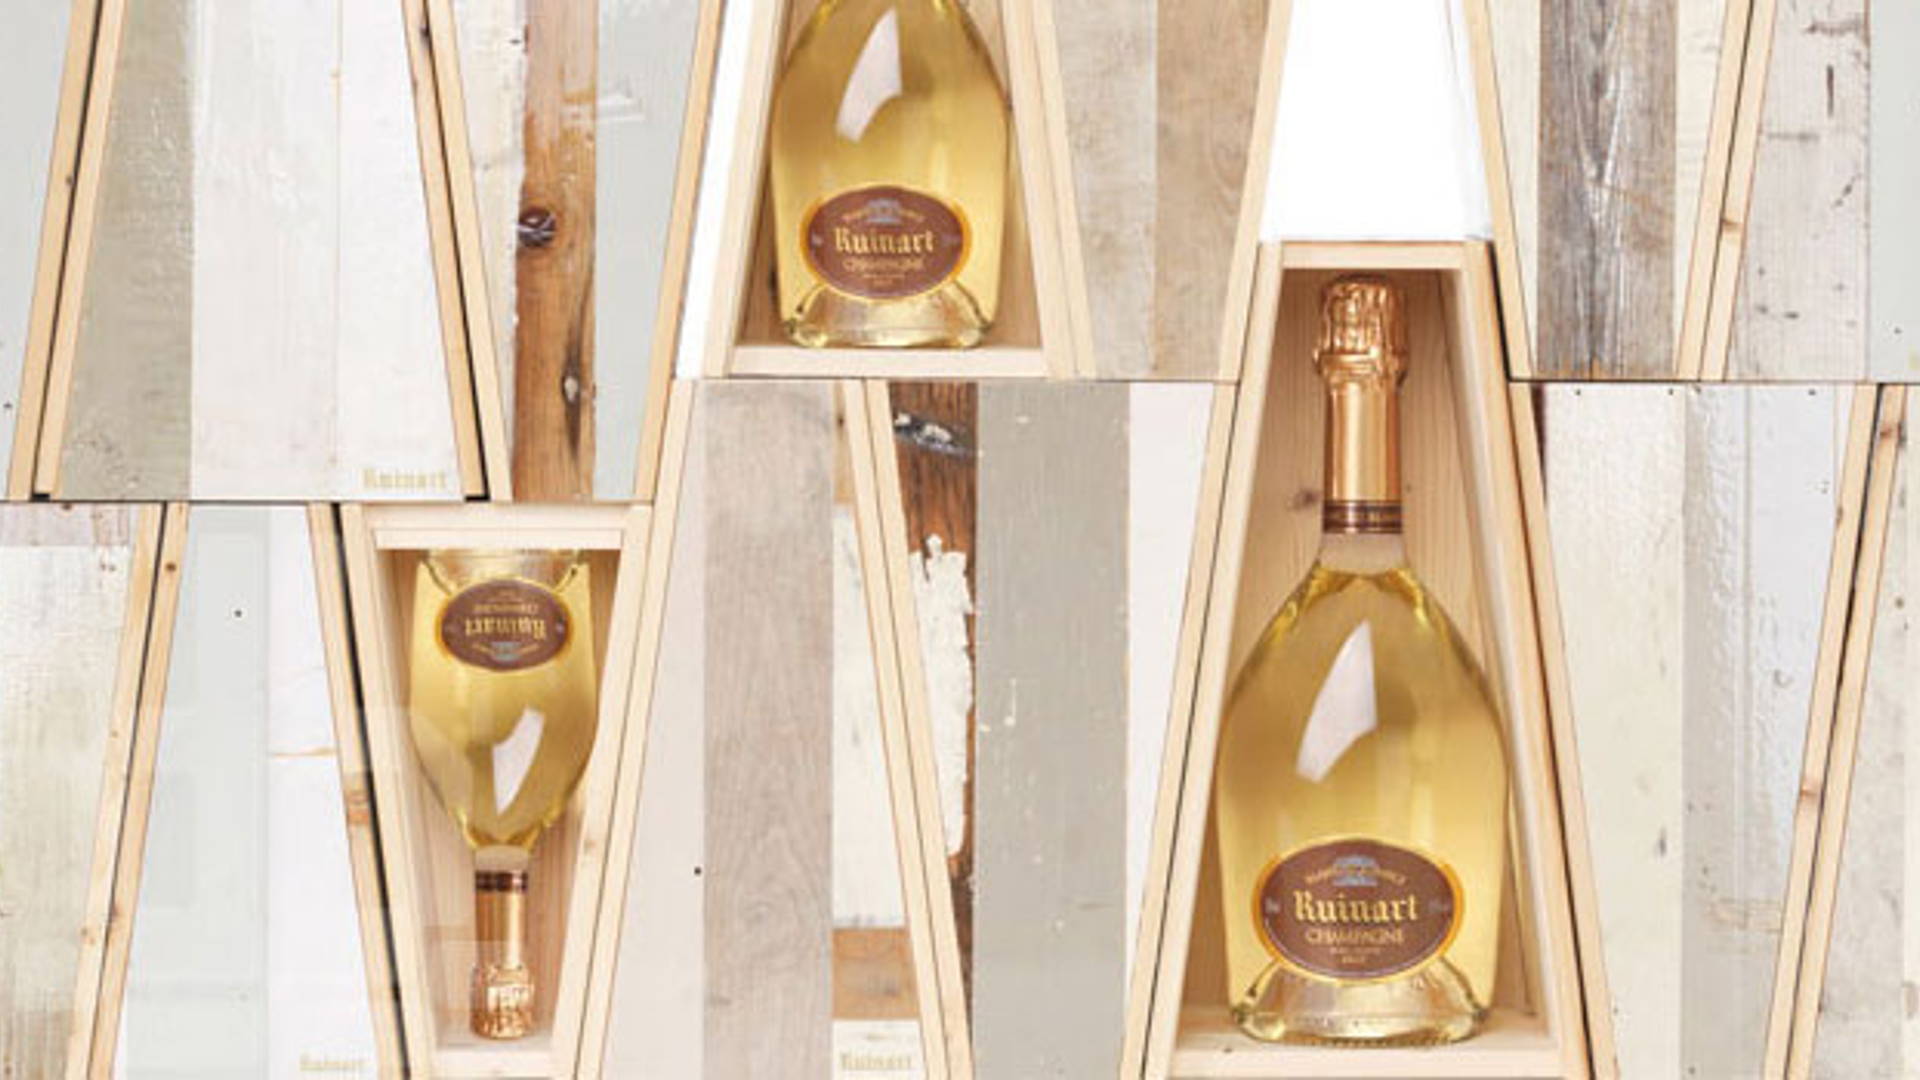 Featured image for Ruinart Champagne Reclaimed Wood Packaging by Piet Hein Eek